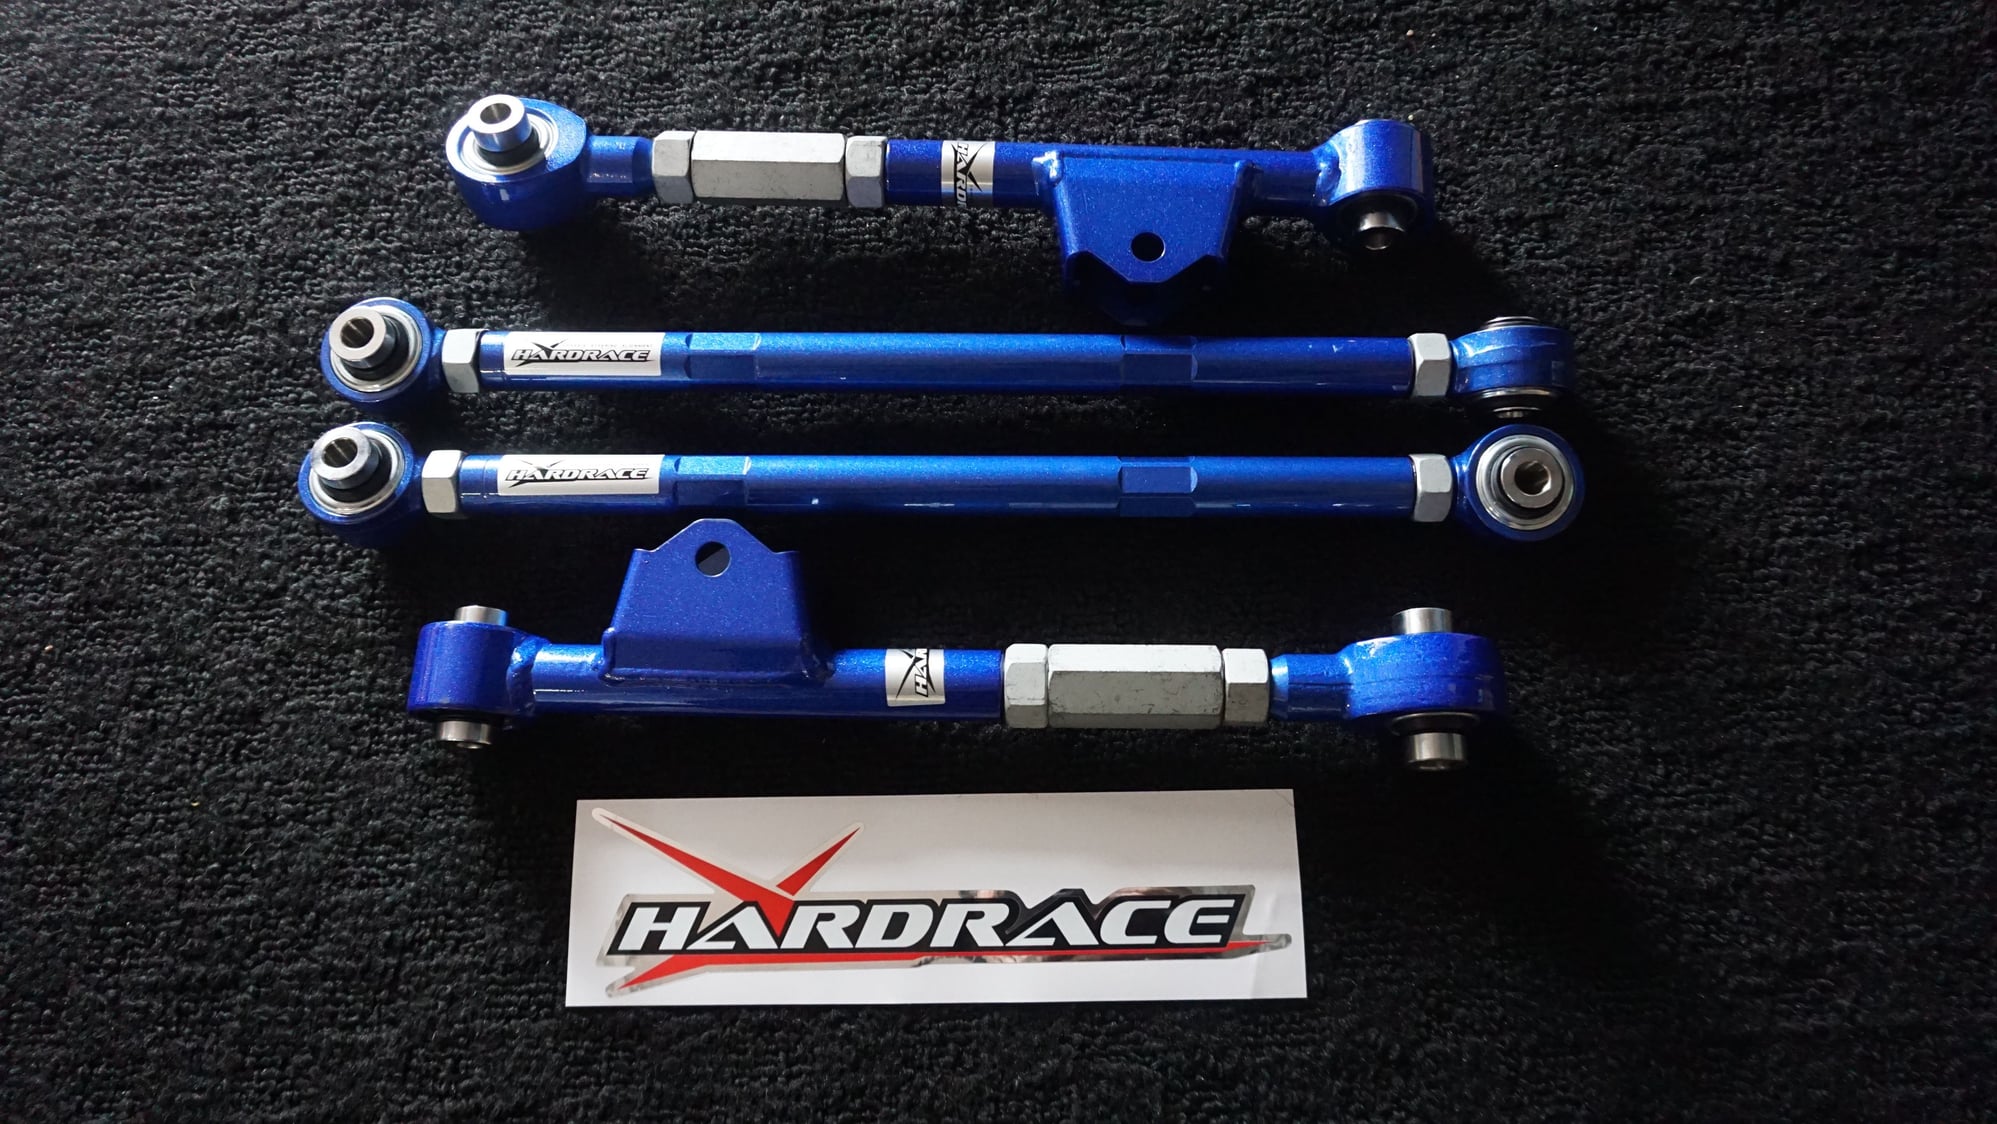 Steering/Suspension - HARDRACE Rear Lower Arms - New - 1993 to 2002 Mazda RX-7 - Tampa, FL 33634, United States